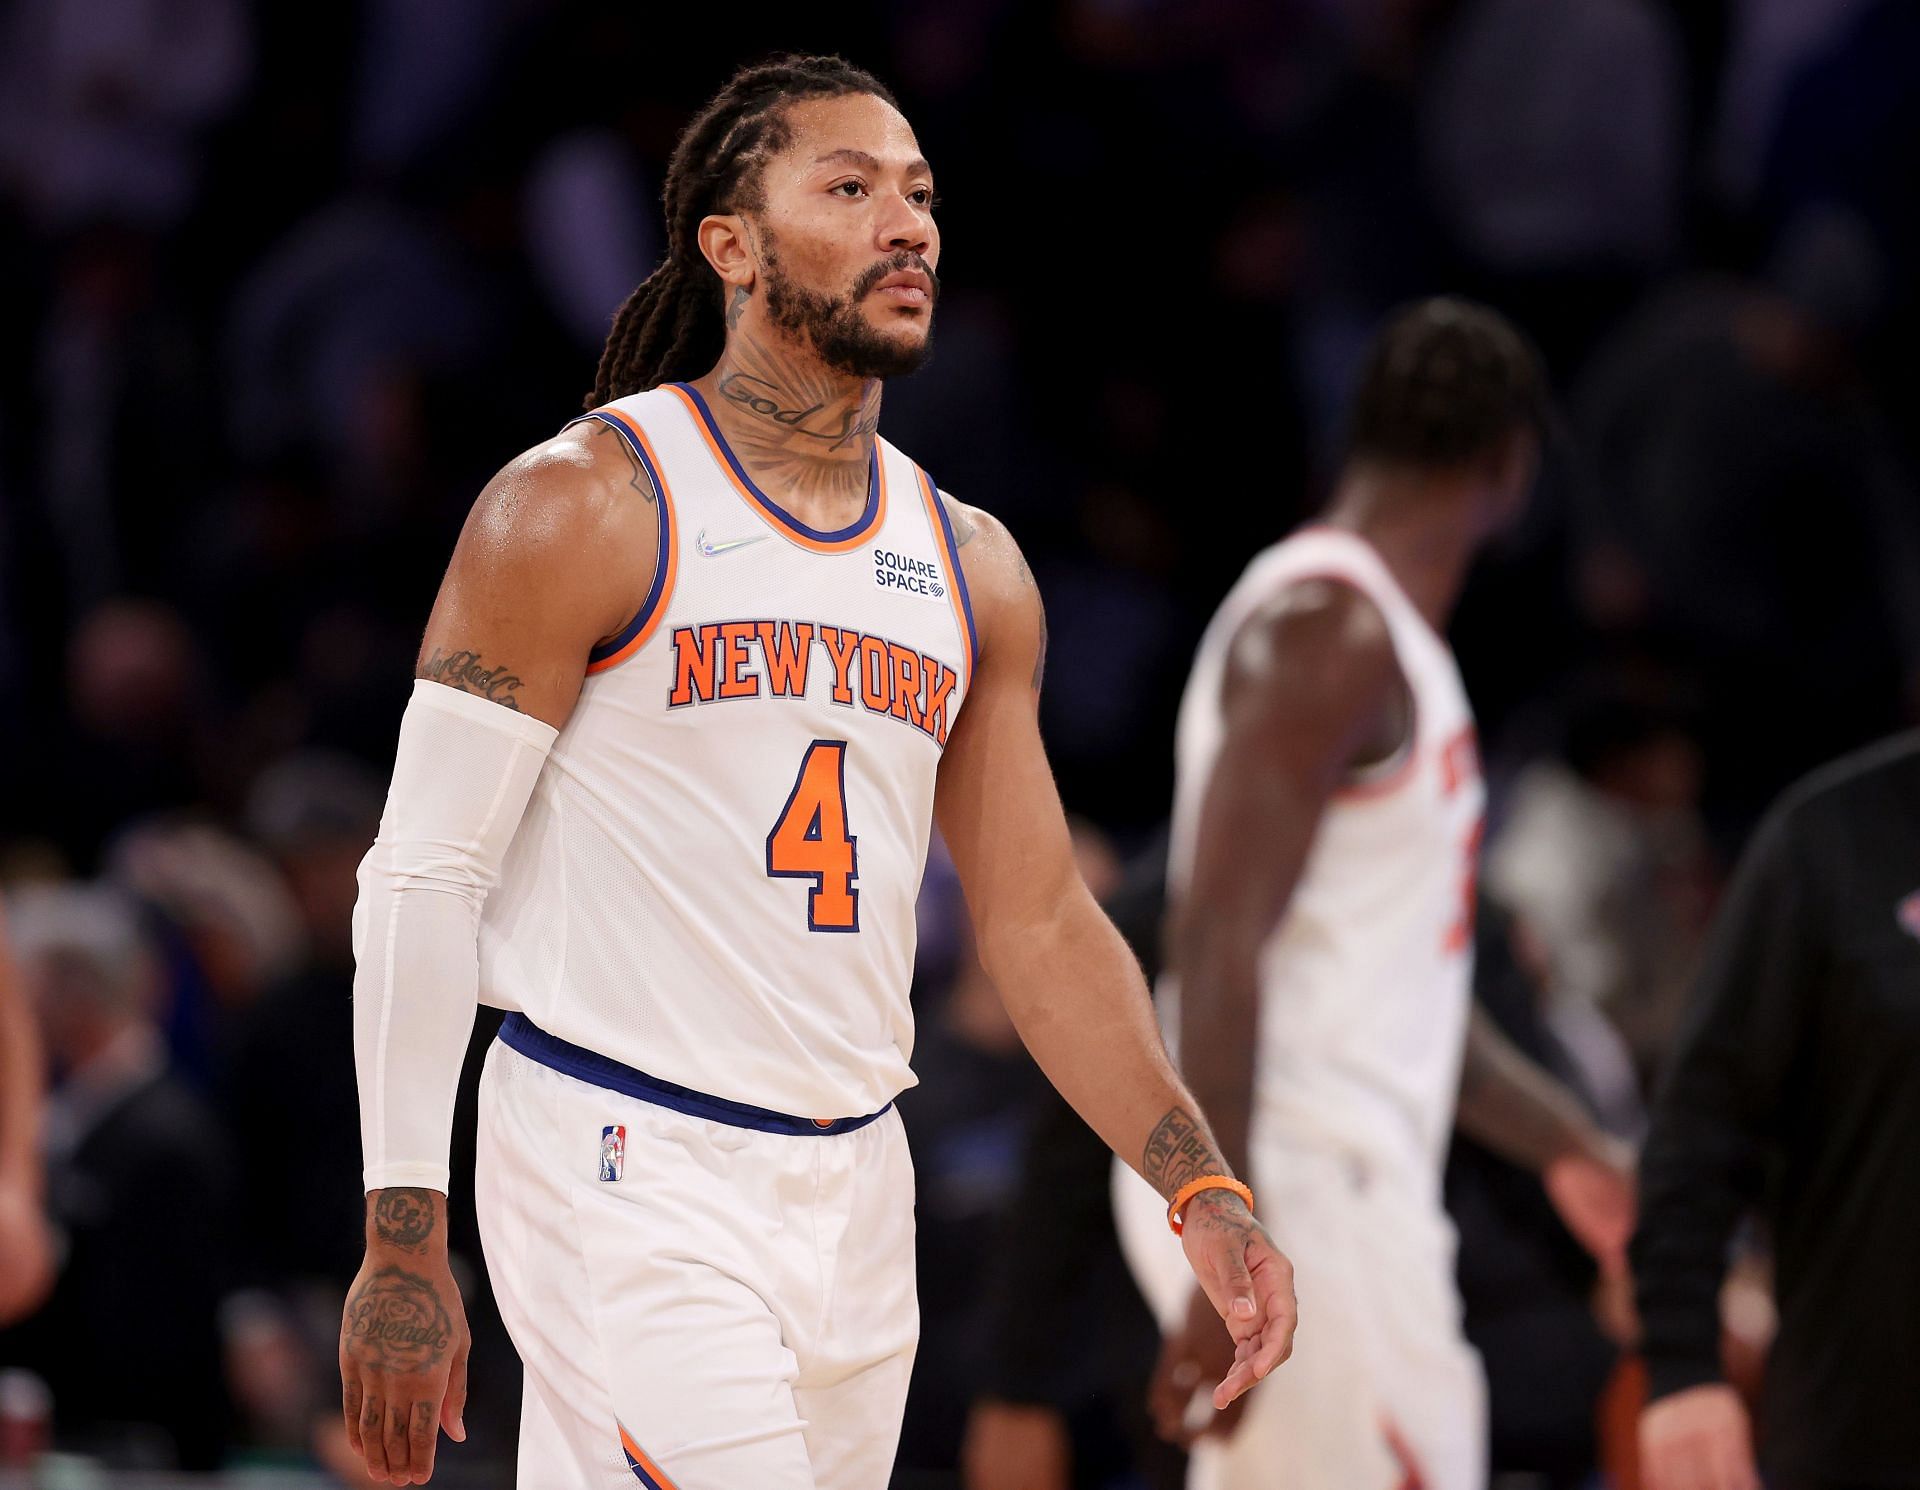 Derrick Rose is listed as questionable for New York Knicks&#039; latest match against the Detroit Pistons.